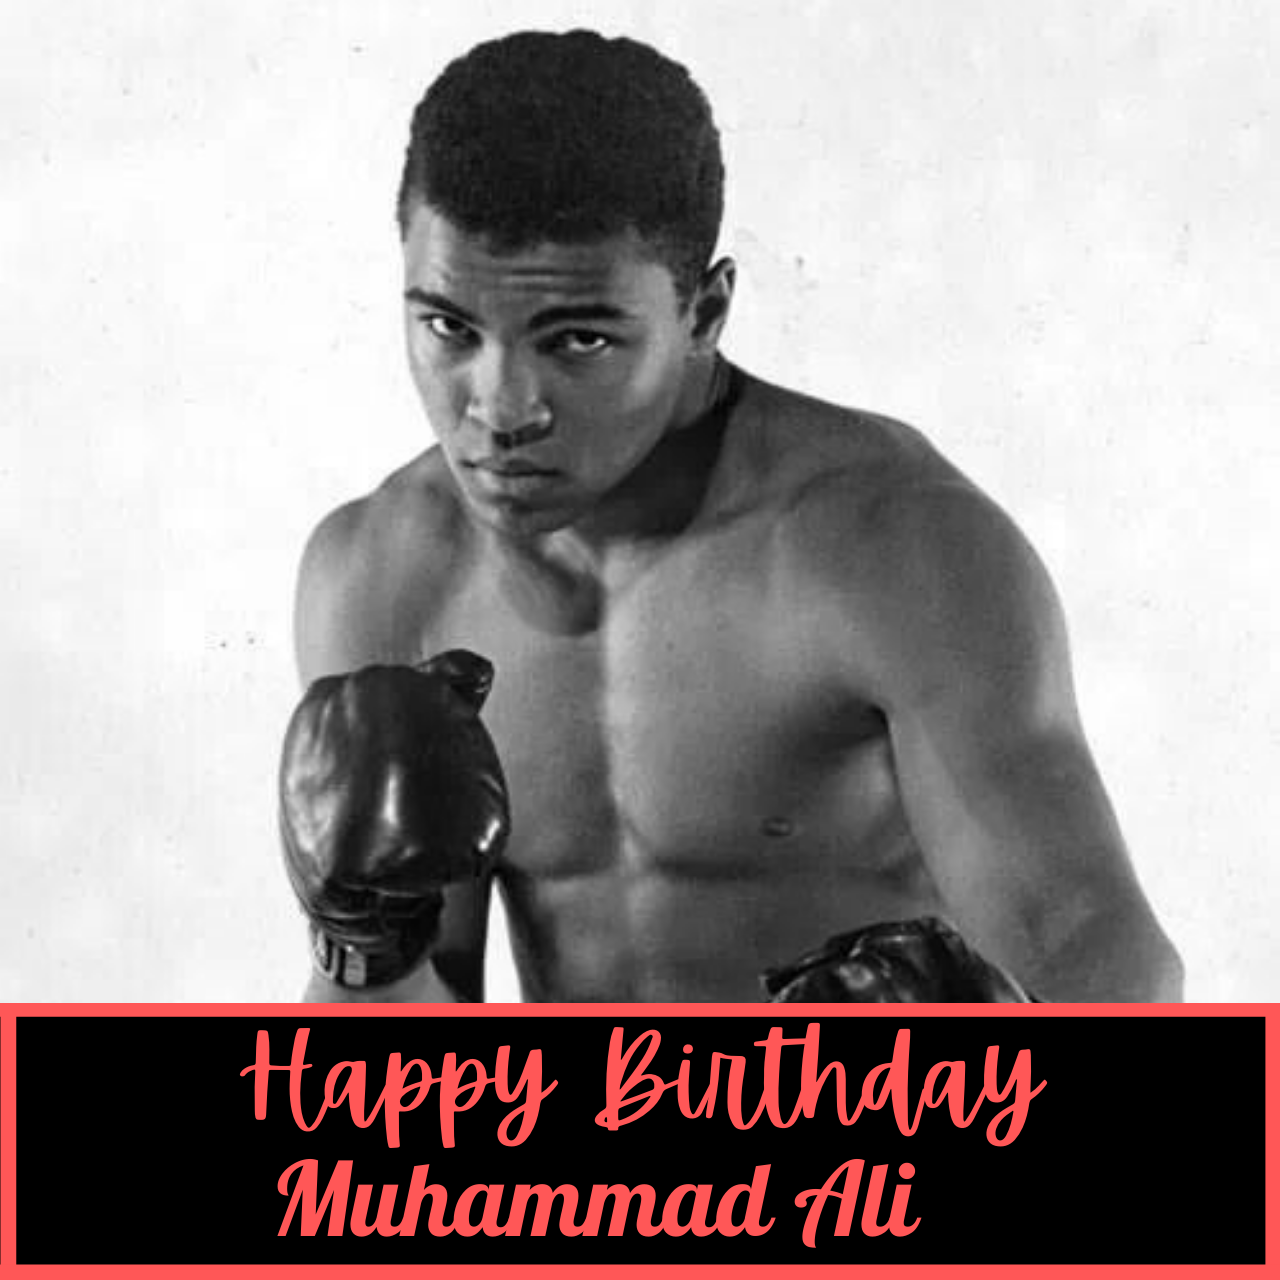 Muhammad Ali Birthday: Top 10 Quotes to remember "The Greatest’ on His Birthday